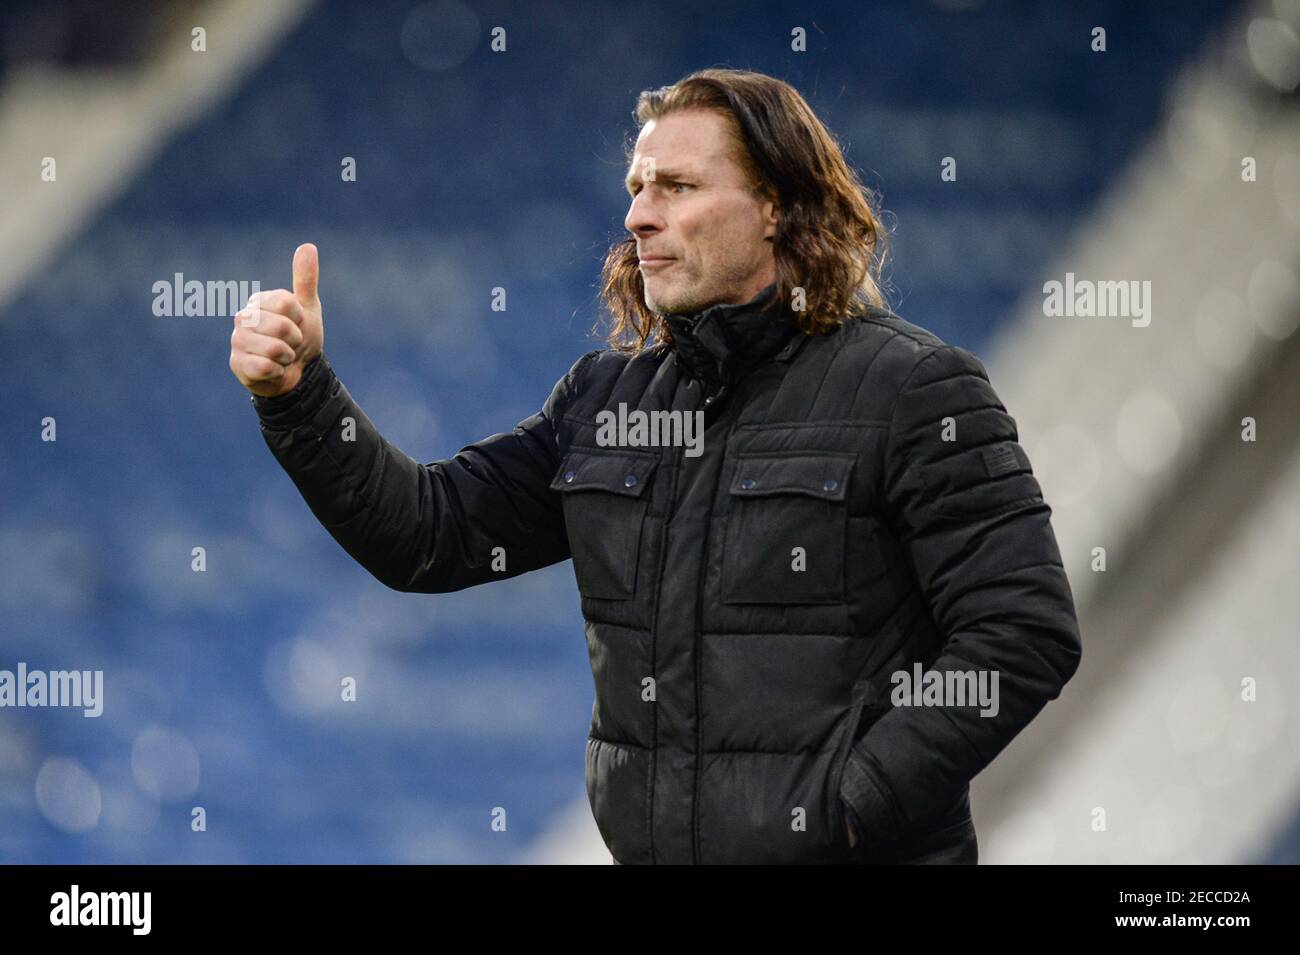 Huddersfield, UK. 13th Feb, 2021. Gareth Ainsworth manager of Wycombe Wanderers during the game in Huddersfield, UK on 2/13/2021. (Photo by Dean Williams/News Images/Sipa USA) Credit: Sipa USA/Alamy Live News Stock Photo